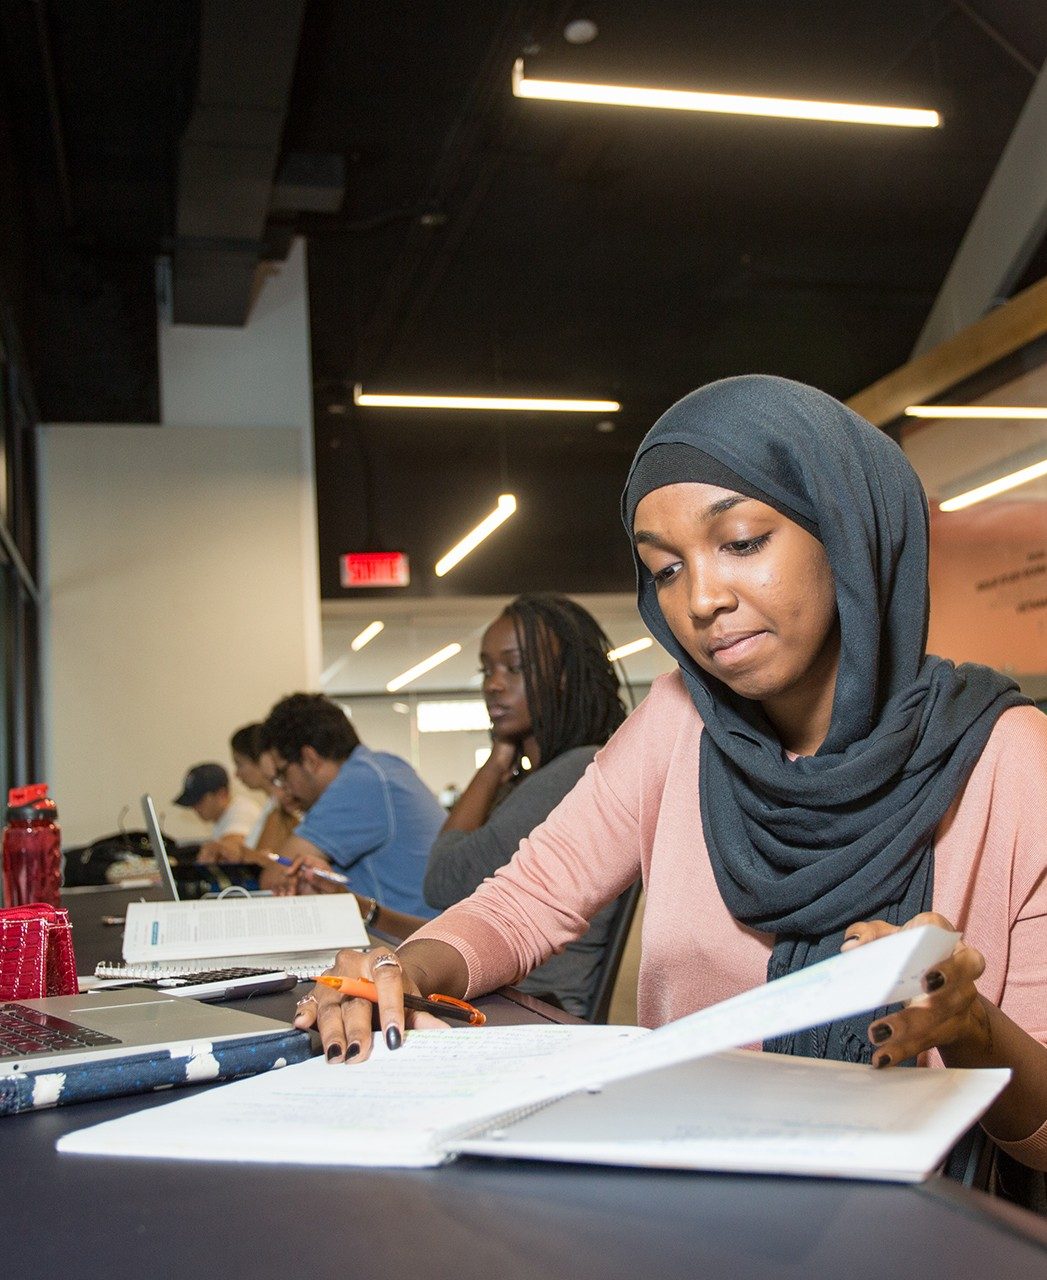 A student wearing a hijab reads a page in a notebook and other students study nearby